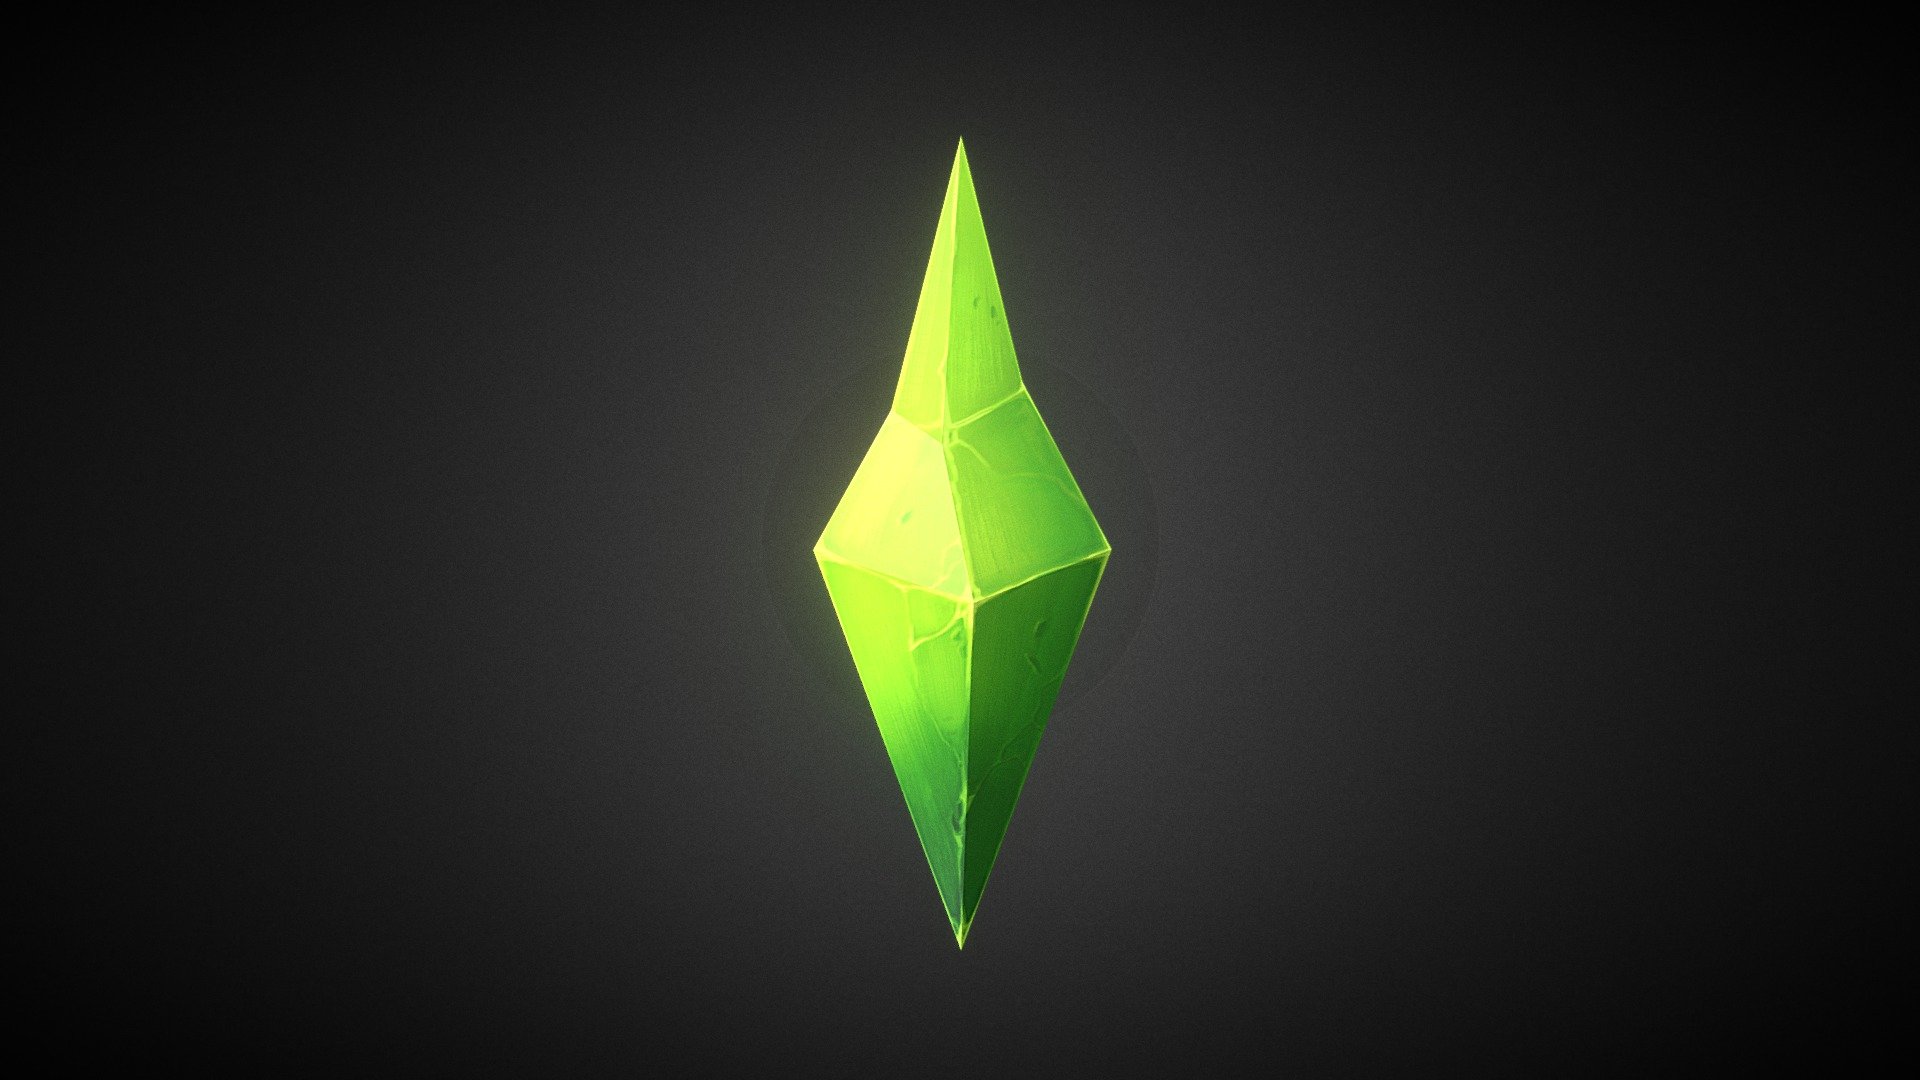 A gem shard for our game, The Jungle is Scary 3d model